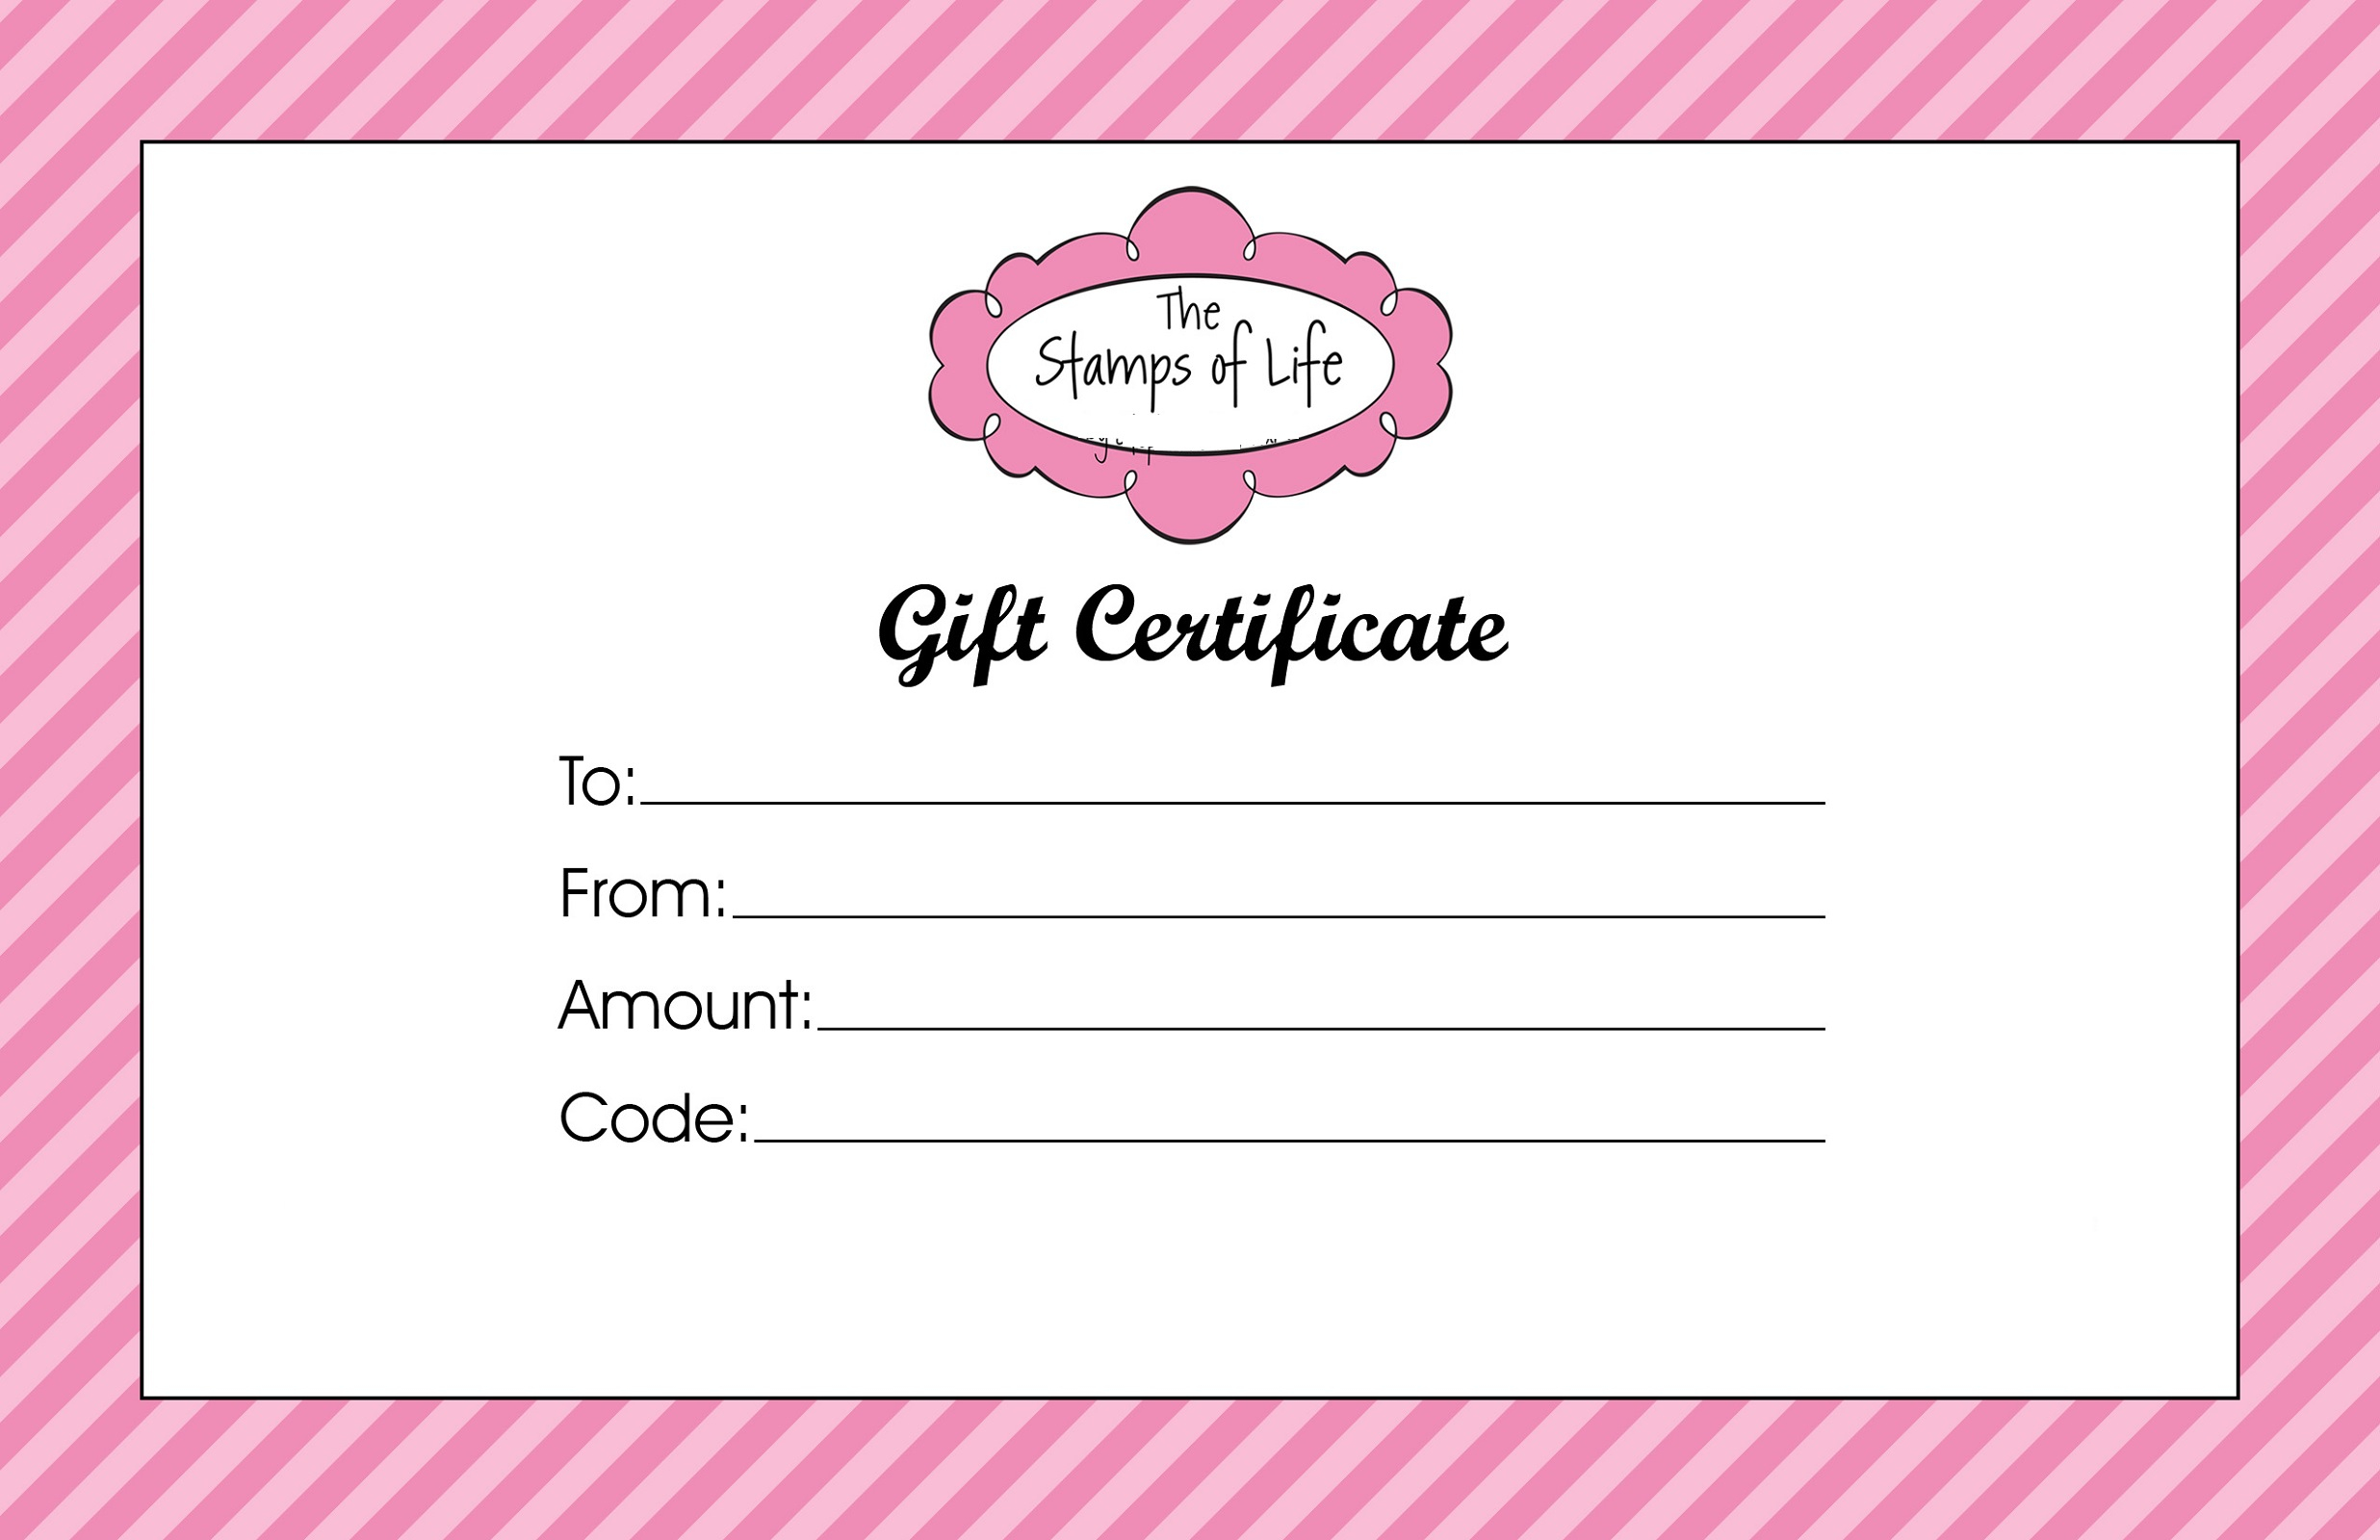 Gift Certificate Templates to Print  Activity Shelter Within Love Certificate Templates